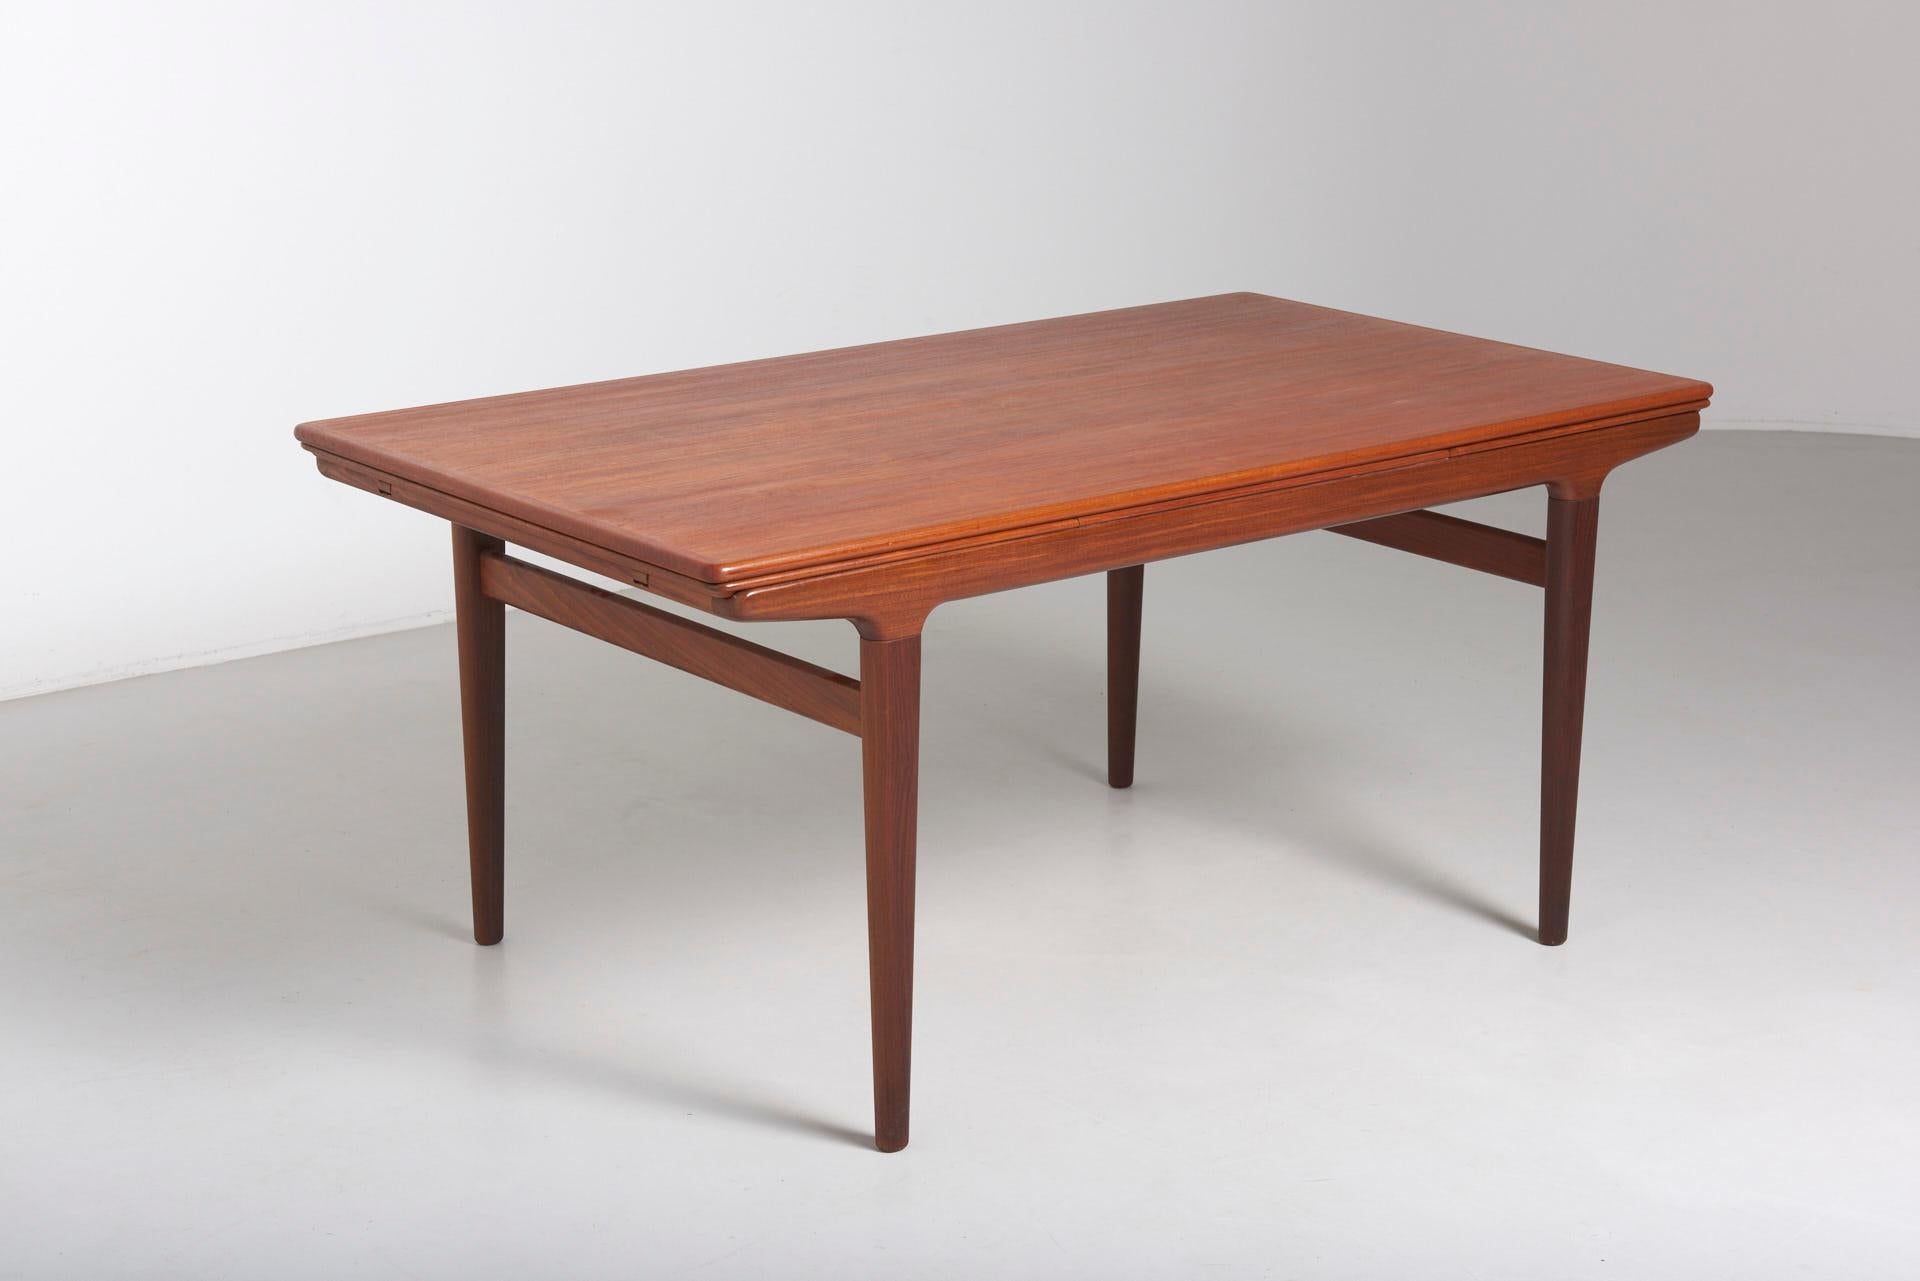 Extendable teak dining table designed by Johannes Andersen and manufactured in Denmark by the Uldum Møbelfabrik in the 1960's. The two extensions enlarge the table with 1 meter, from 1m60 to 2m60. Fully unfolded, the table can serve ten people.